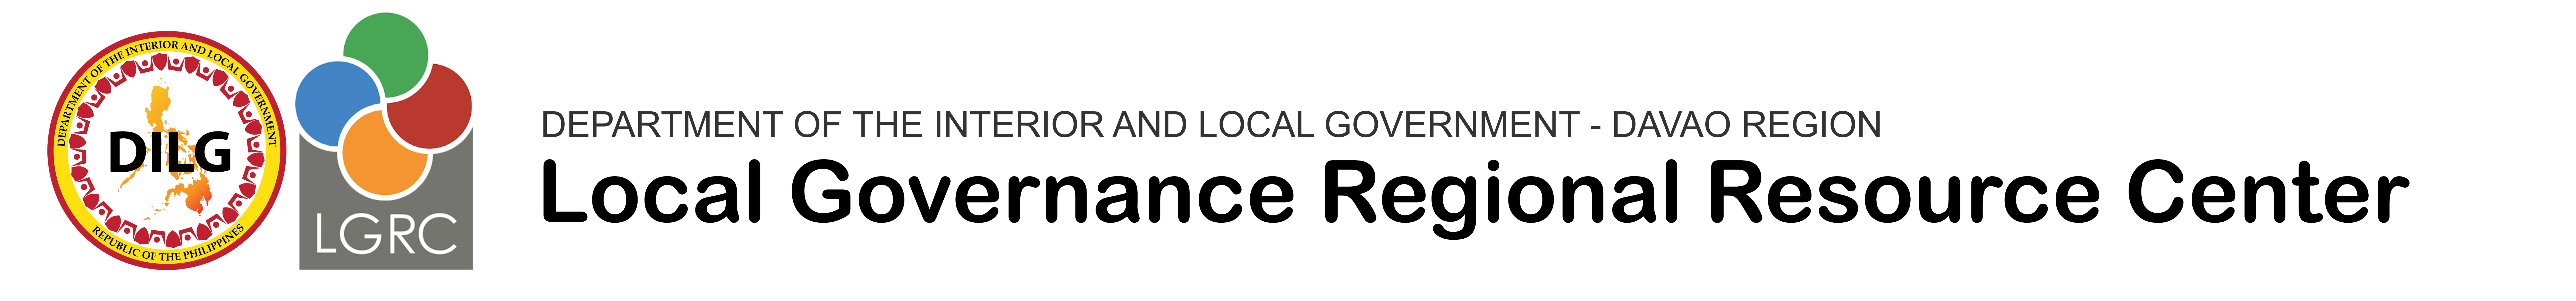 Official Website of the DILG Local Governance Regional Resource Center XI